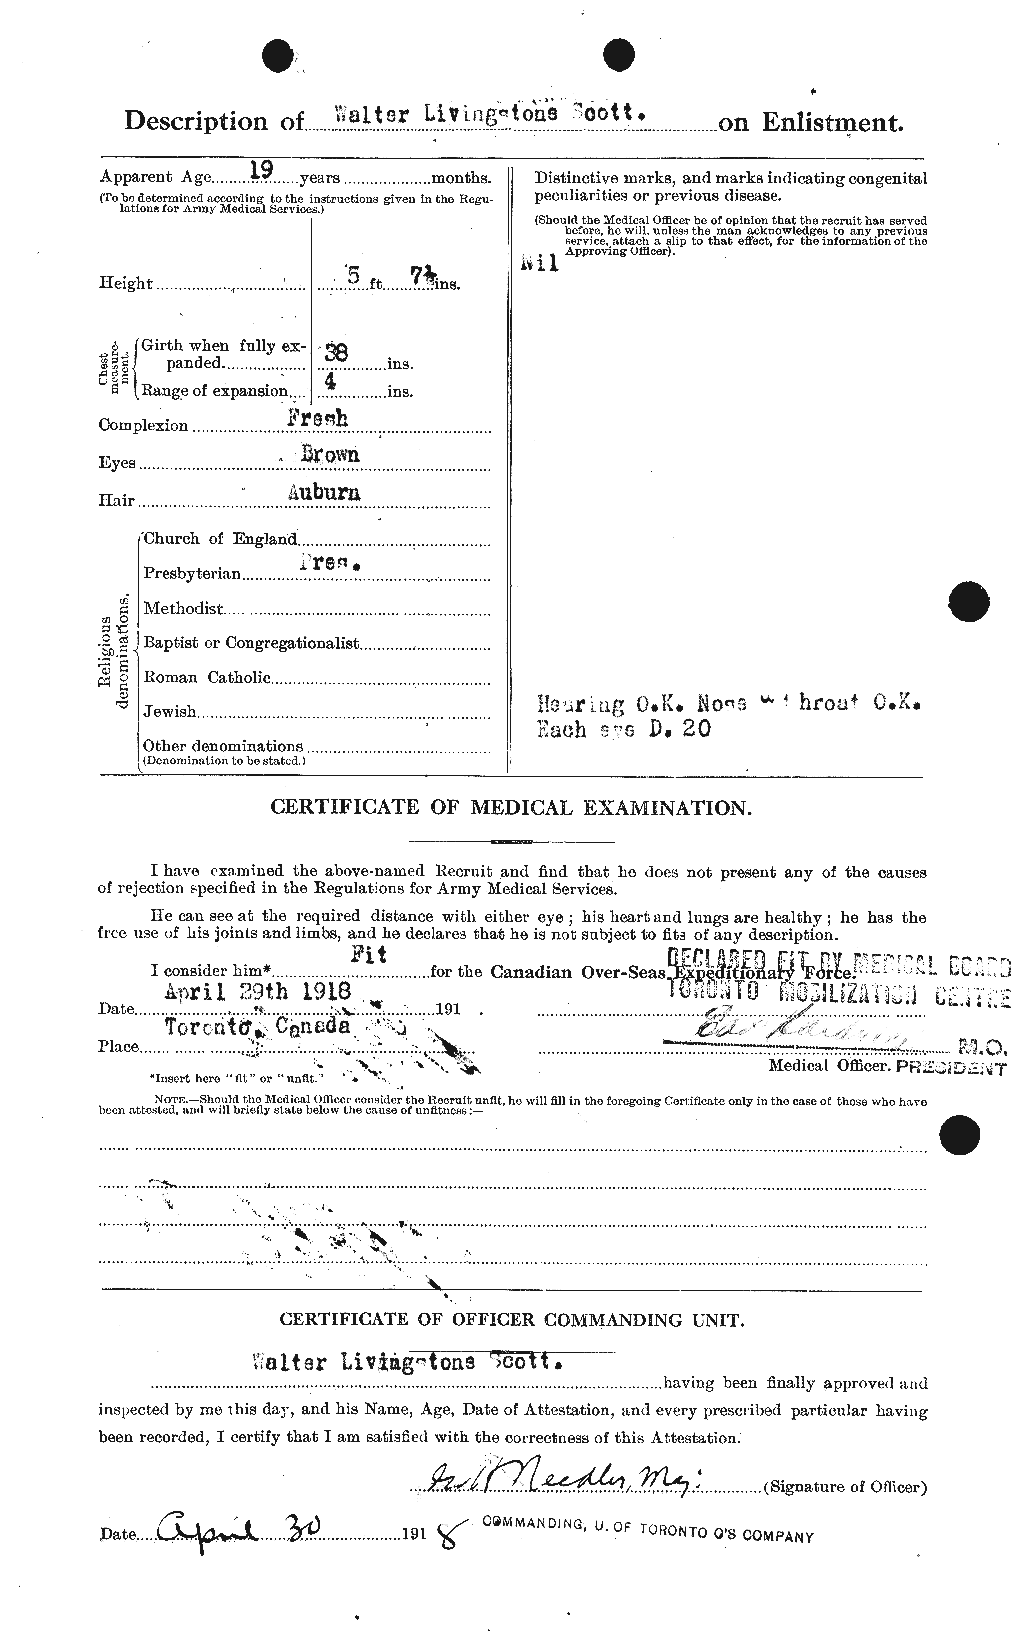 Personnel Records of the First World War - CEF 087970b